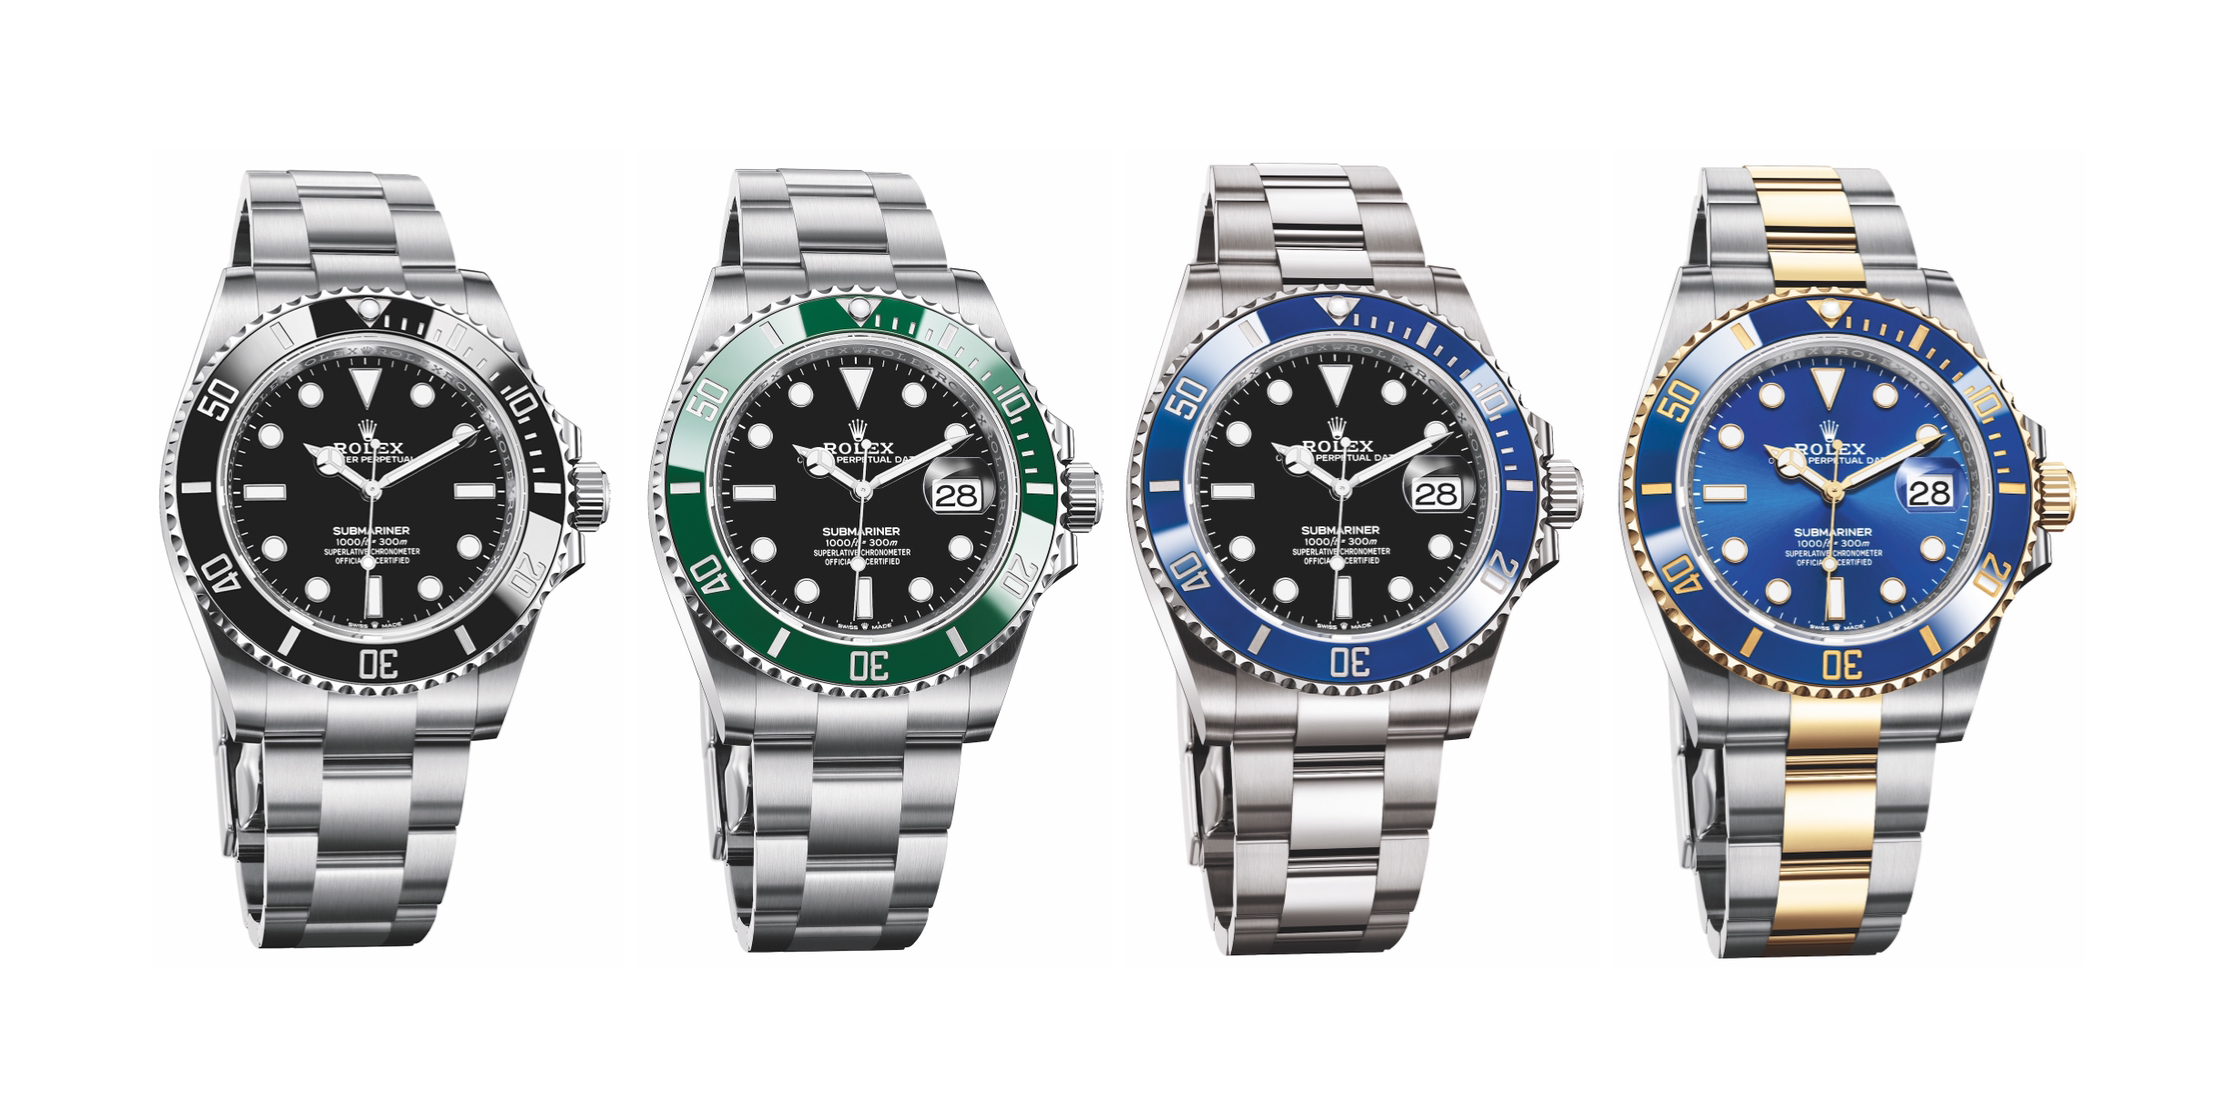 The fully redesigned Rolex Submariner 